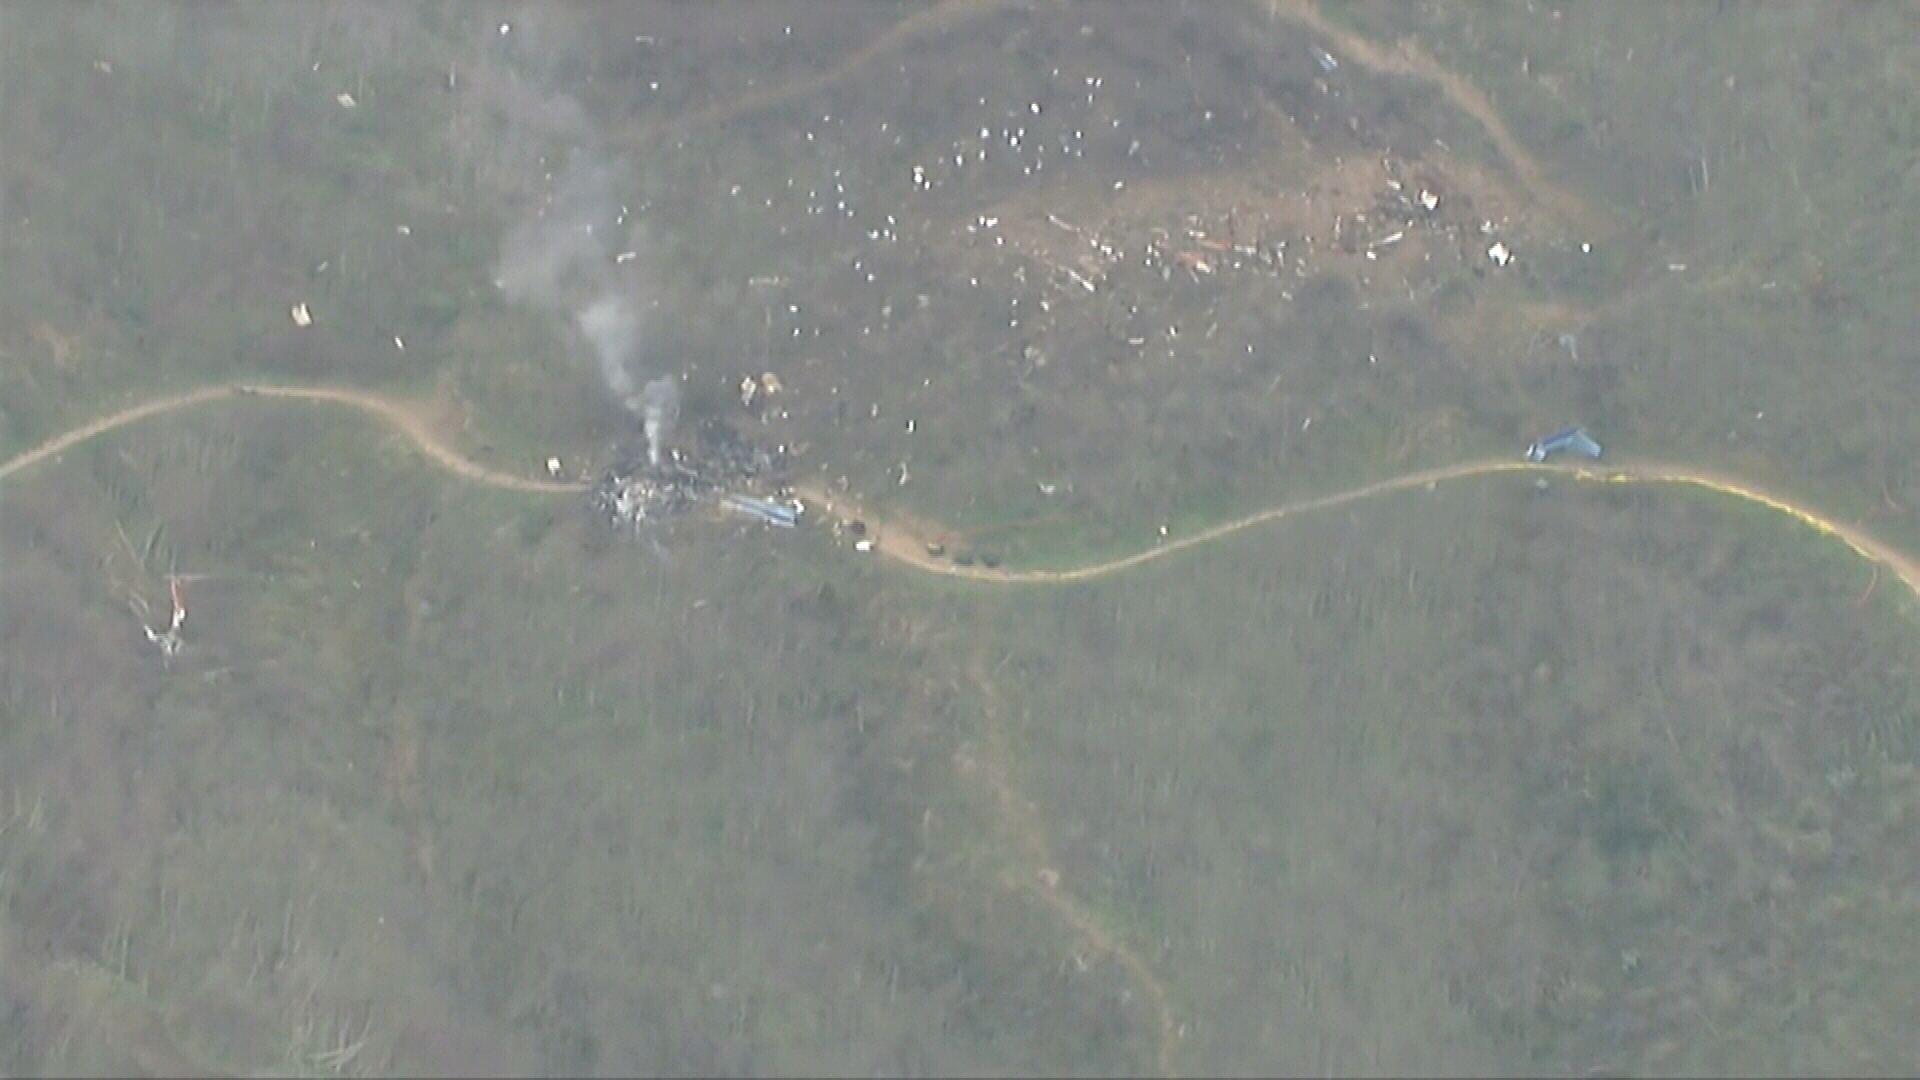 Aerial shot of the helicopter crash, where Kobe Bryant and all passengers on board were killed.